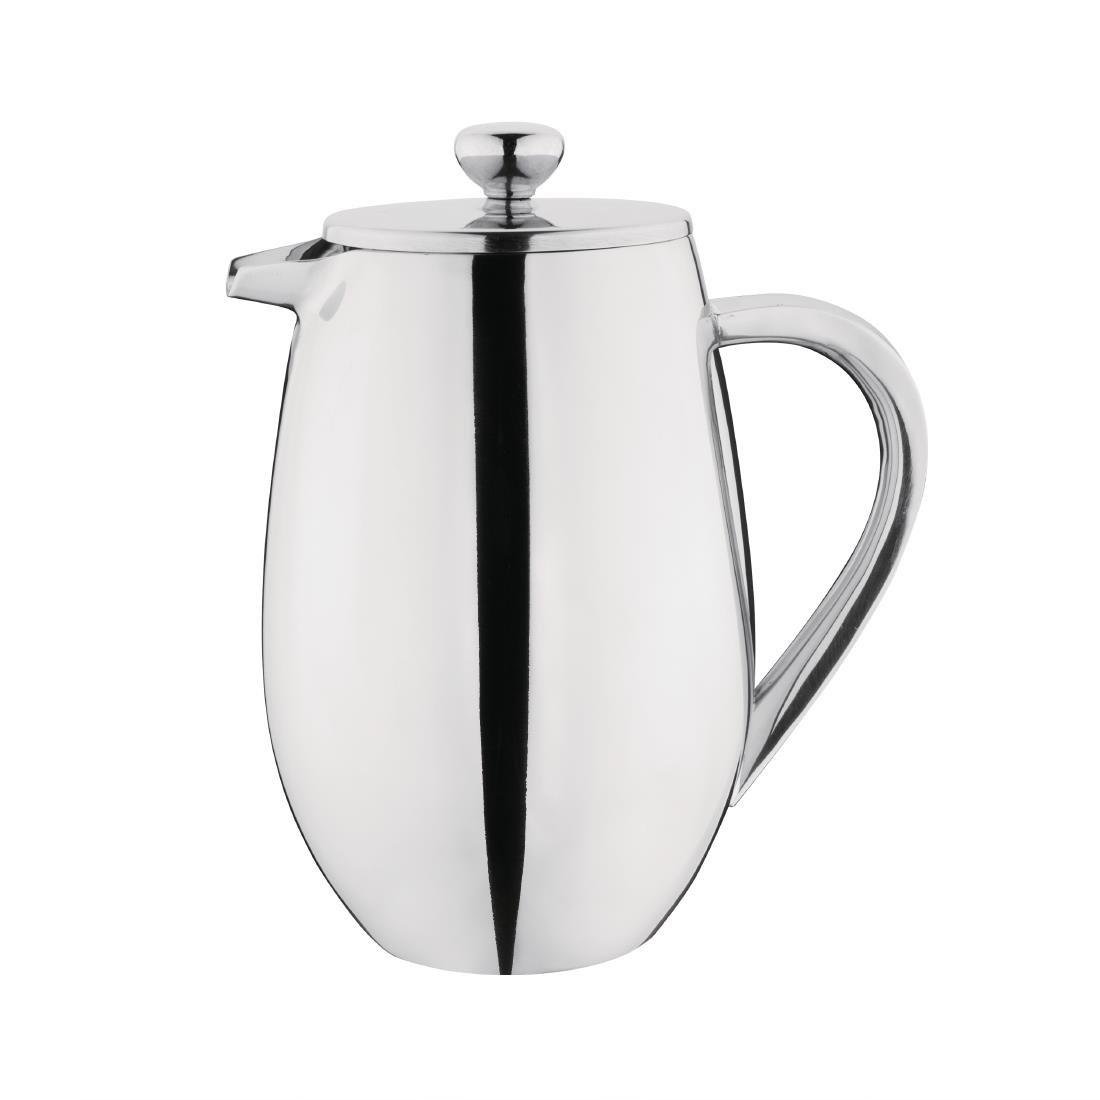 W837 - Stainless Steel Cafetiere